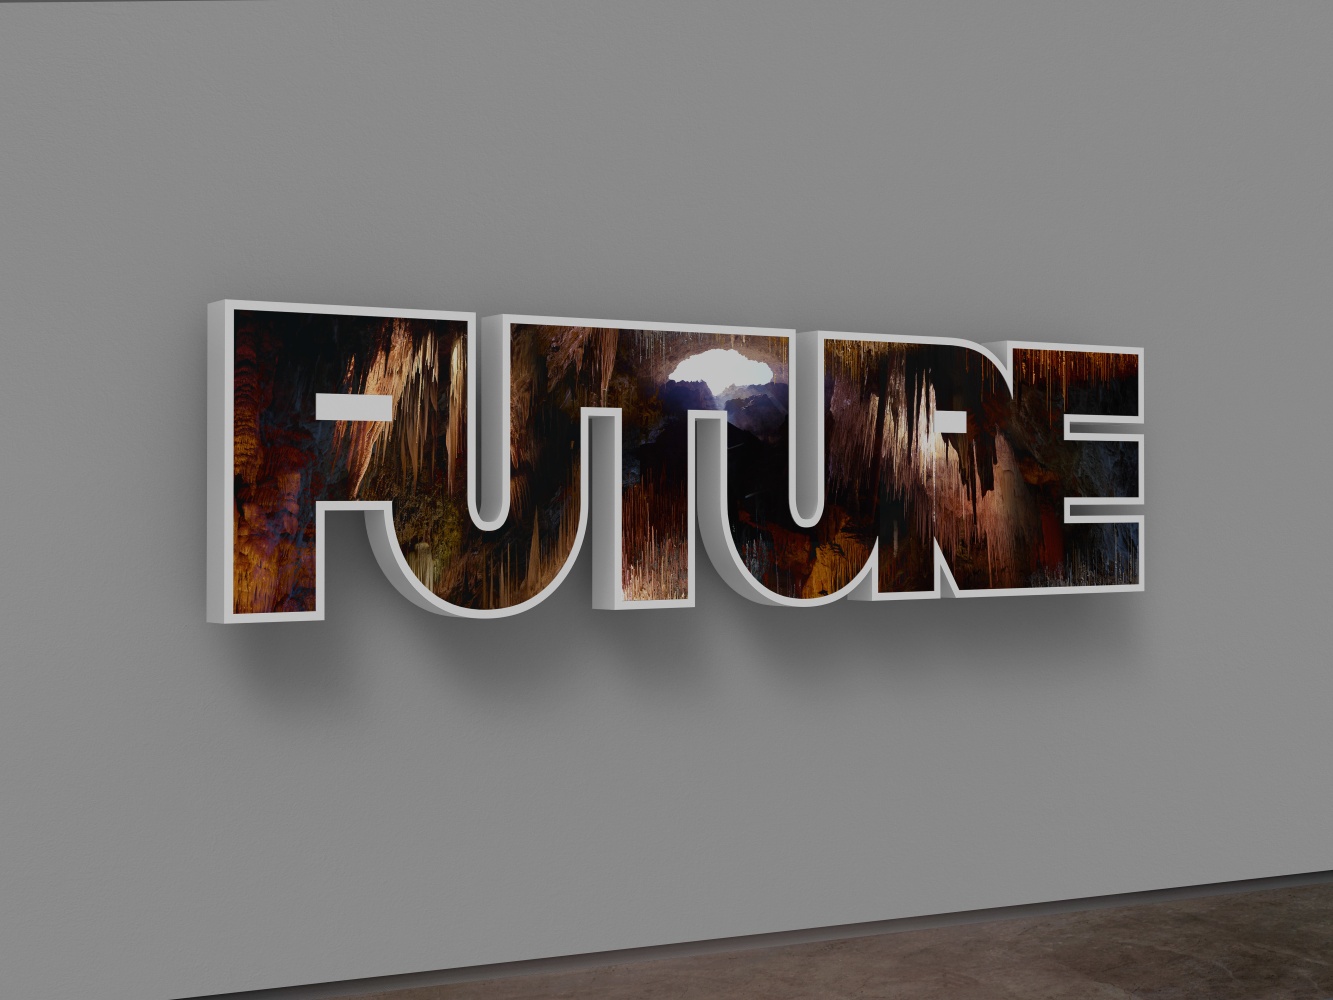 Doug Aitken

FUTURE (open doors)

2020

Chromogenic transparency on acrylic in aluminum lightbox with LEDs

34 3/8 x 136 x 7 inches (87.3 x 345.4 x 17.8 cm)

Edition&amp;nbsp;of 4, with 2AP

DA 680

&amp;nbsp;

INQUIRE